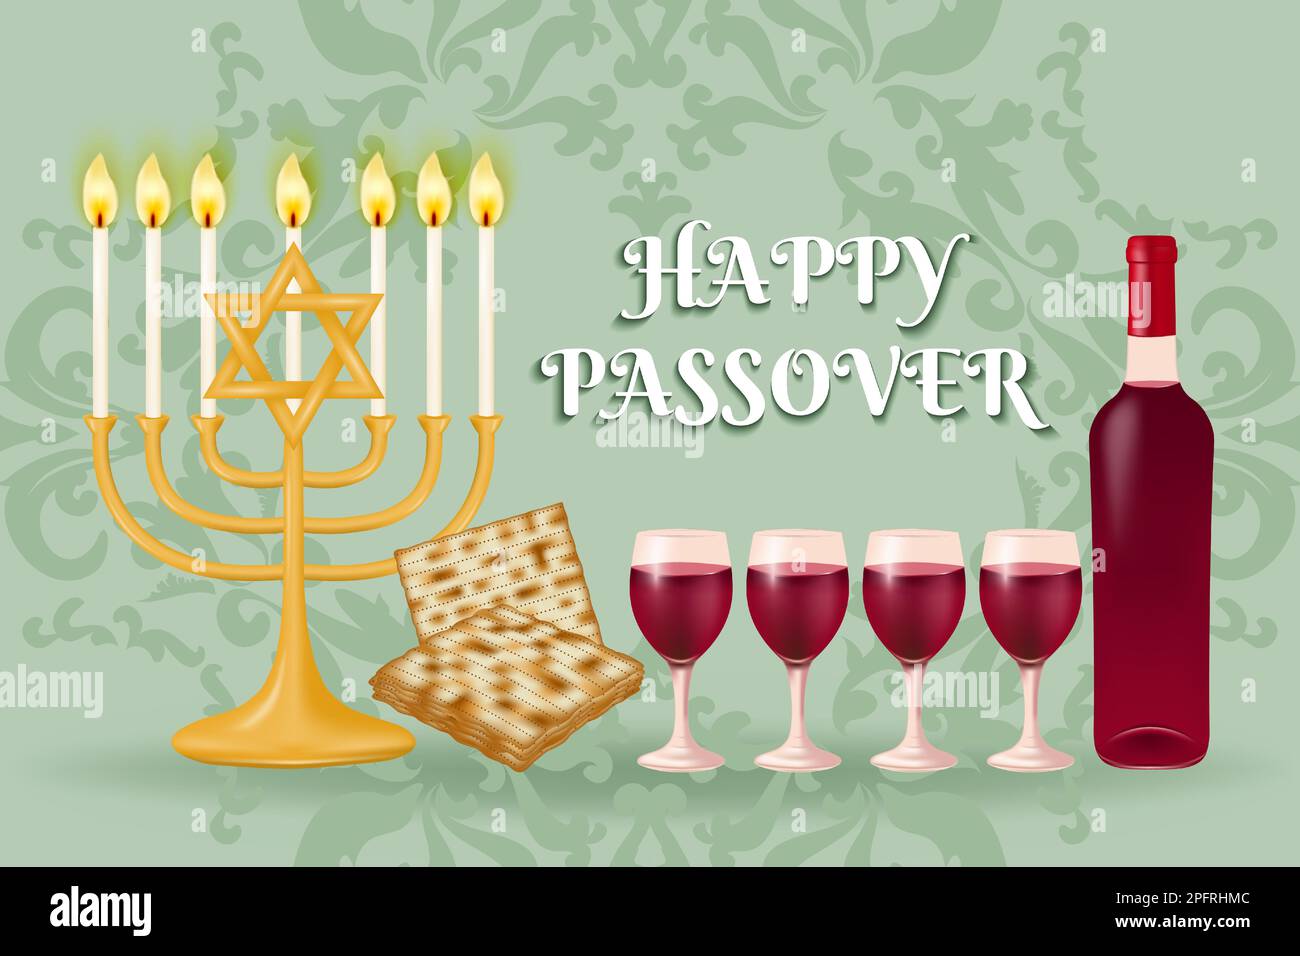 Celebrate the festival of Passover with this beautiful background featuring the Menorah, matzo, red wine set against a patterned design. Vector Stock Vector